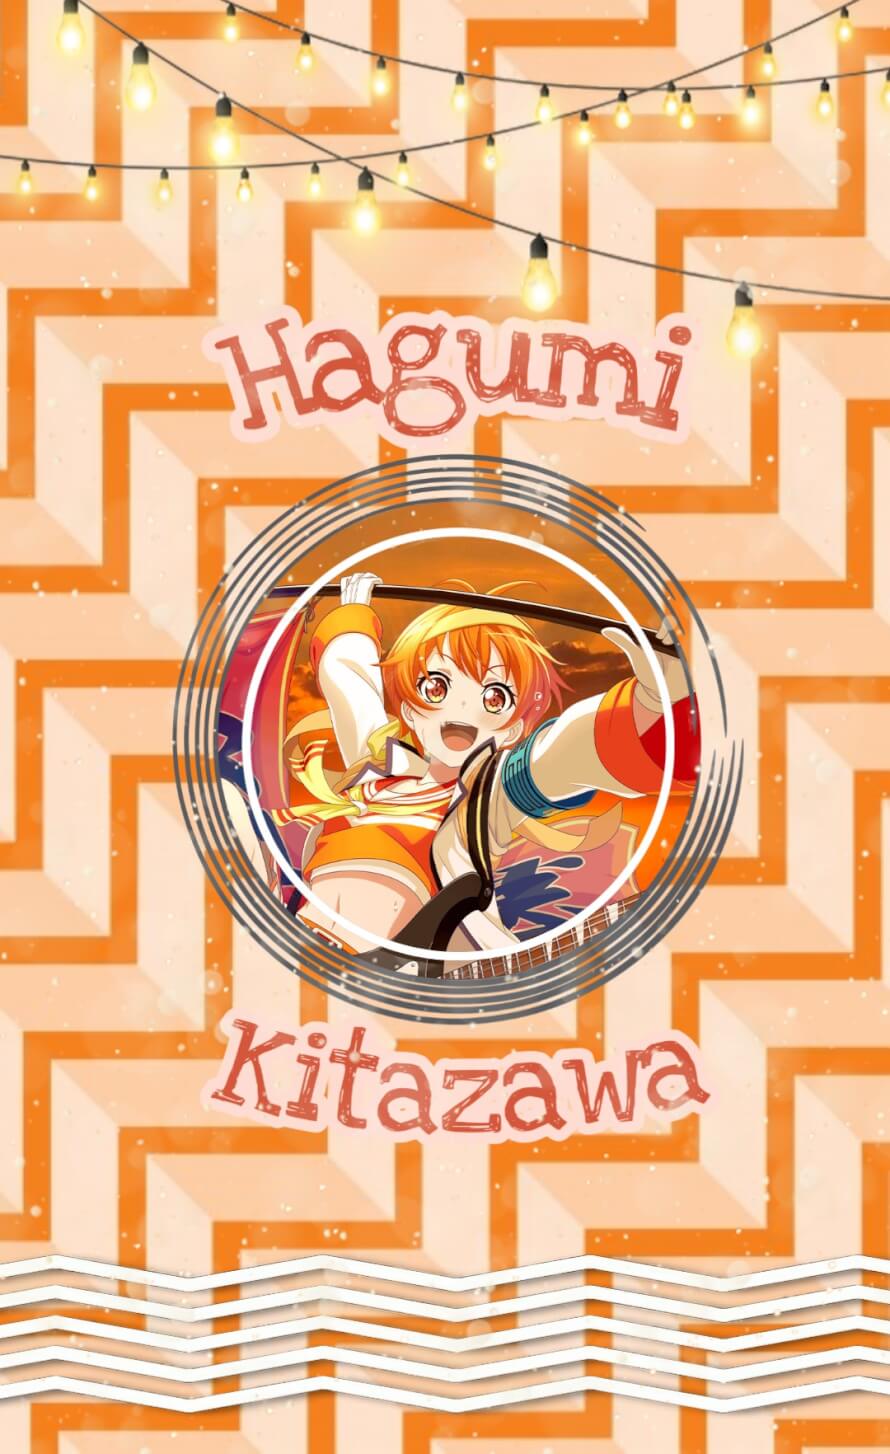 Next up on the amateur edits of HHW, is Hagumi! I'll probably do one for Misaki next.